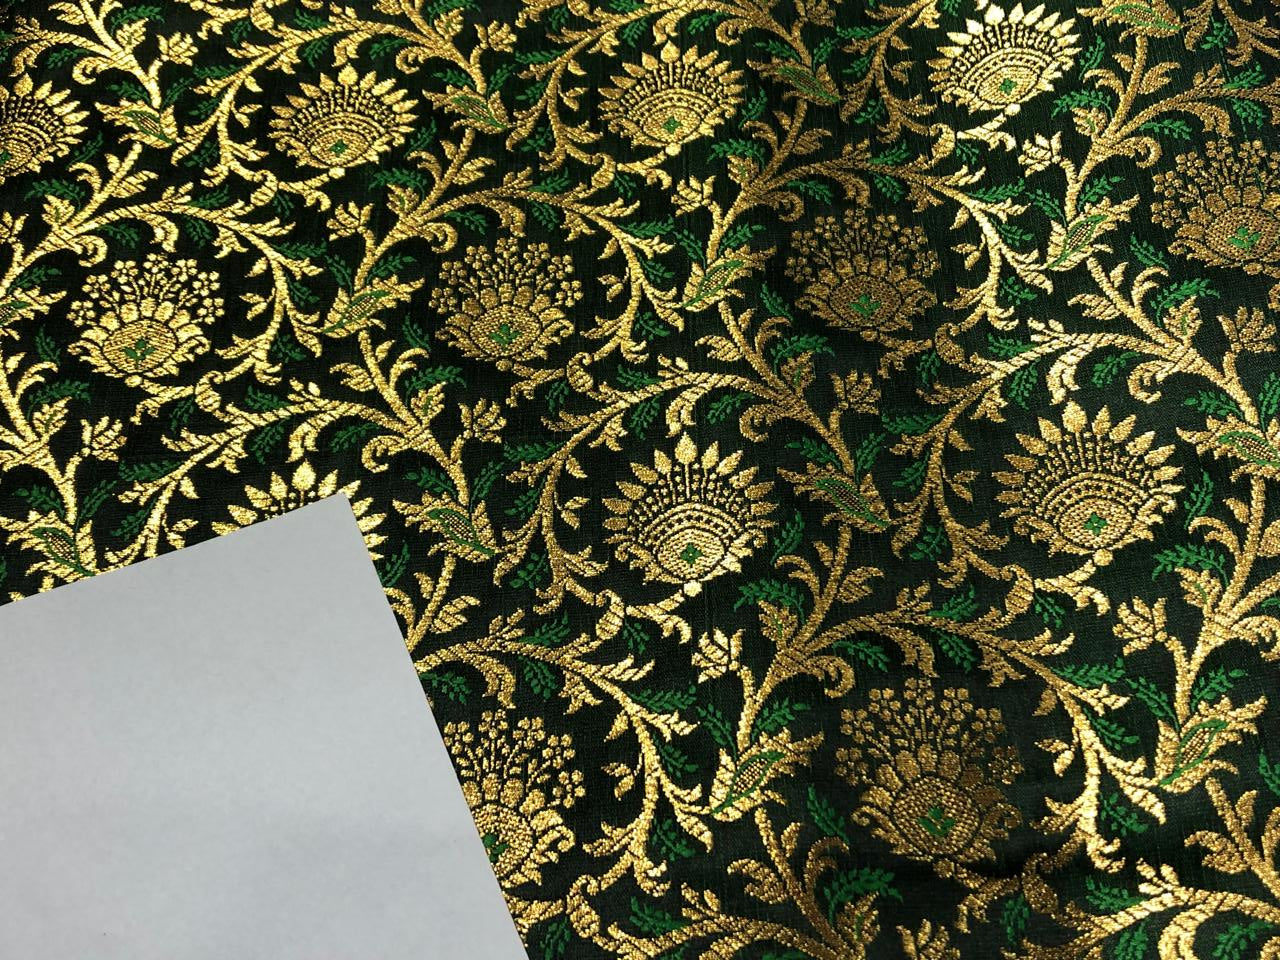 Silk Brocade fabric with metallic gold jacquard 44" wide BRO934 Available in 2 colors green and orange